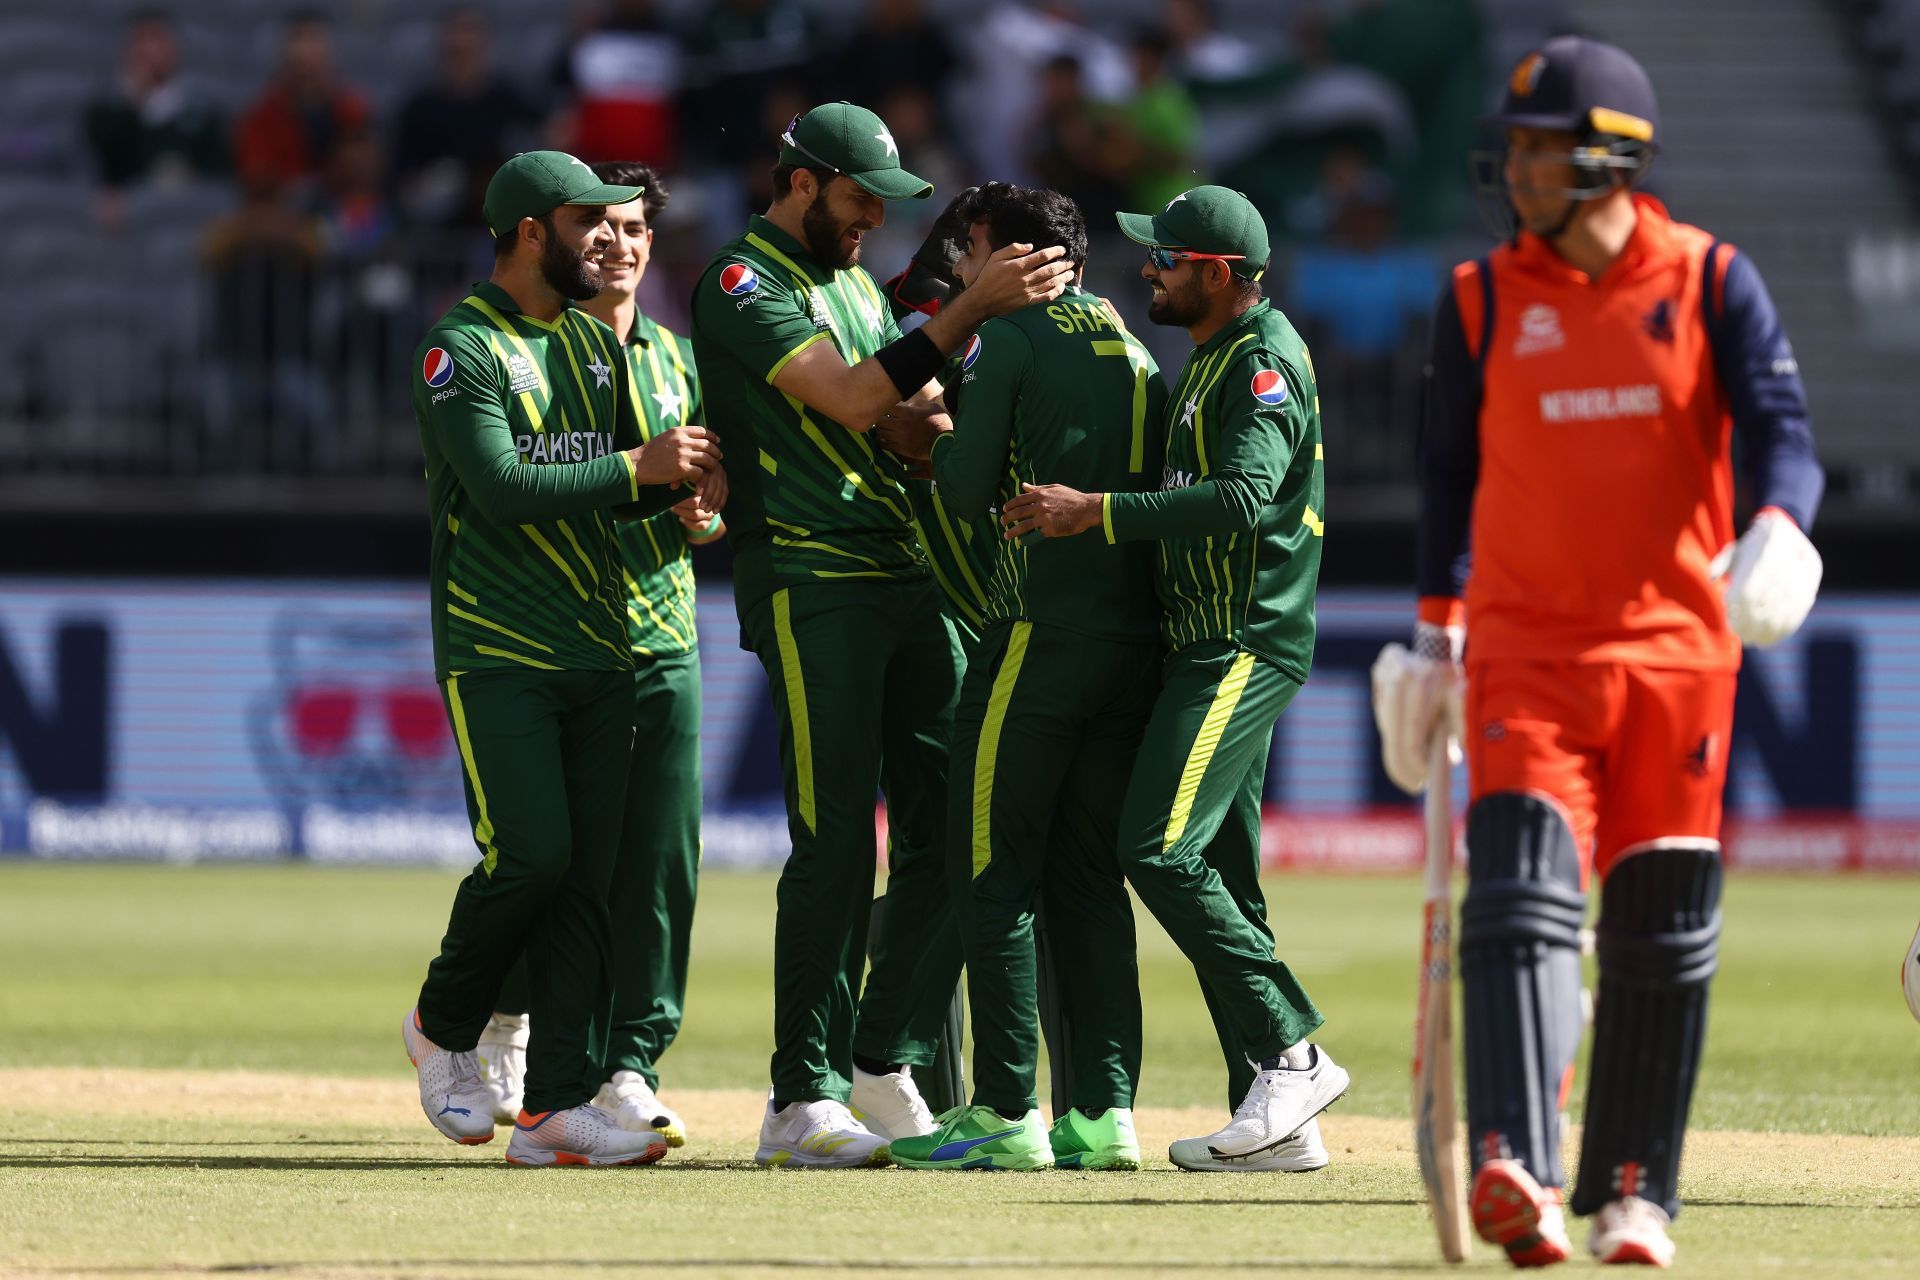 Shadab Khan was the Player of the Match in the Pakistan versus Netherlands game.